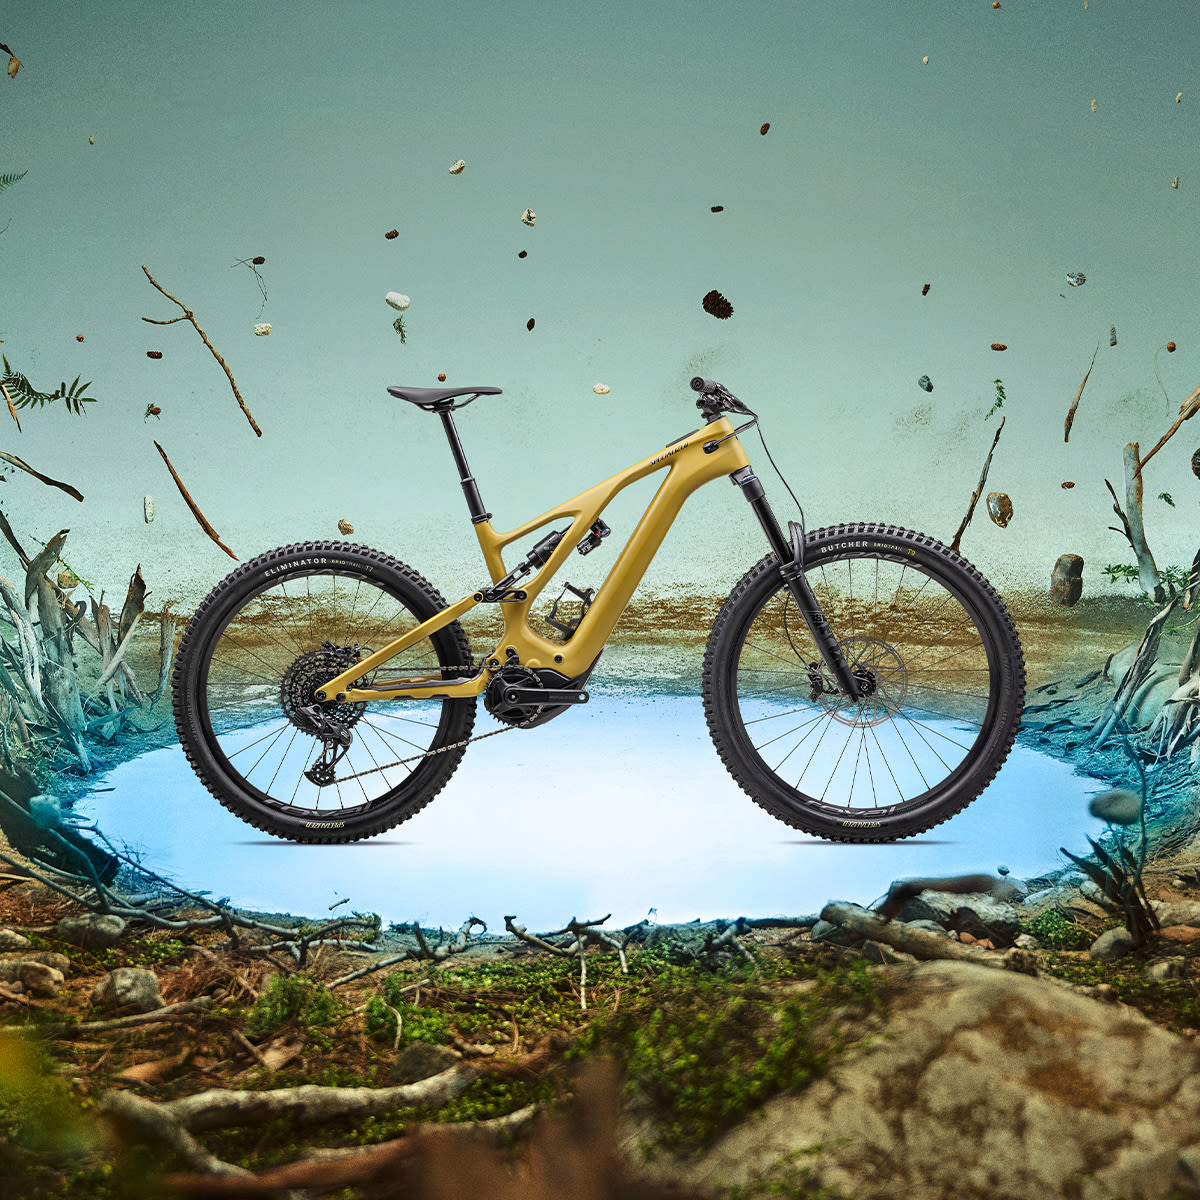 Picture of a gold and black mountain bike on some kind of a fictional lake. There are "natural objects" flying through the air.